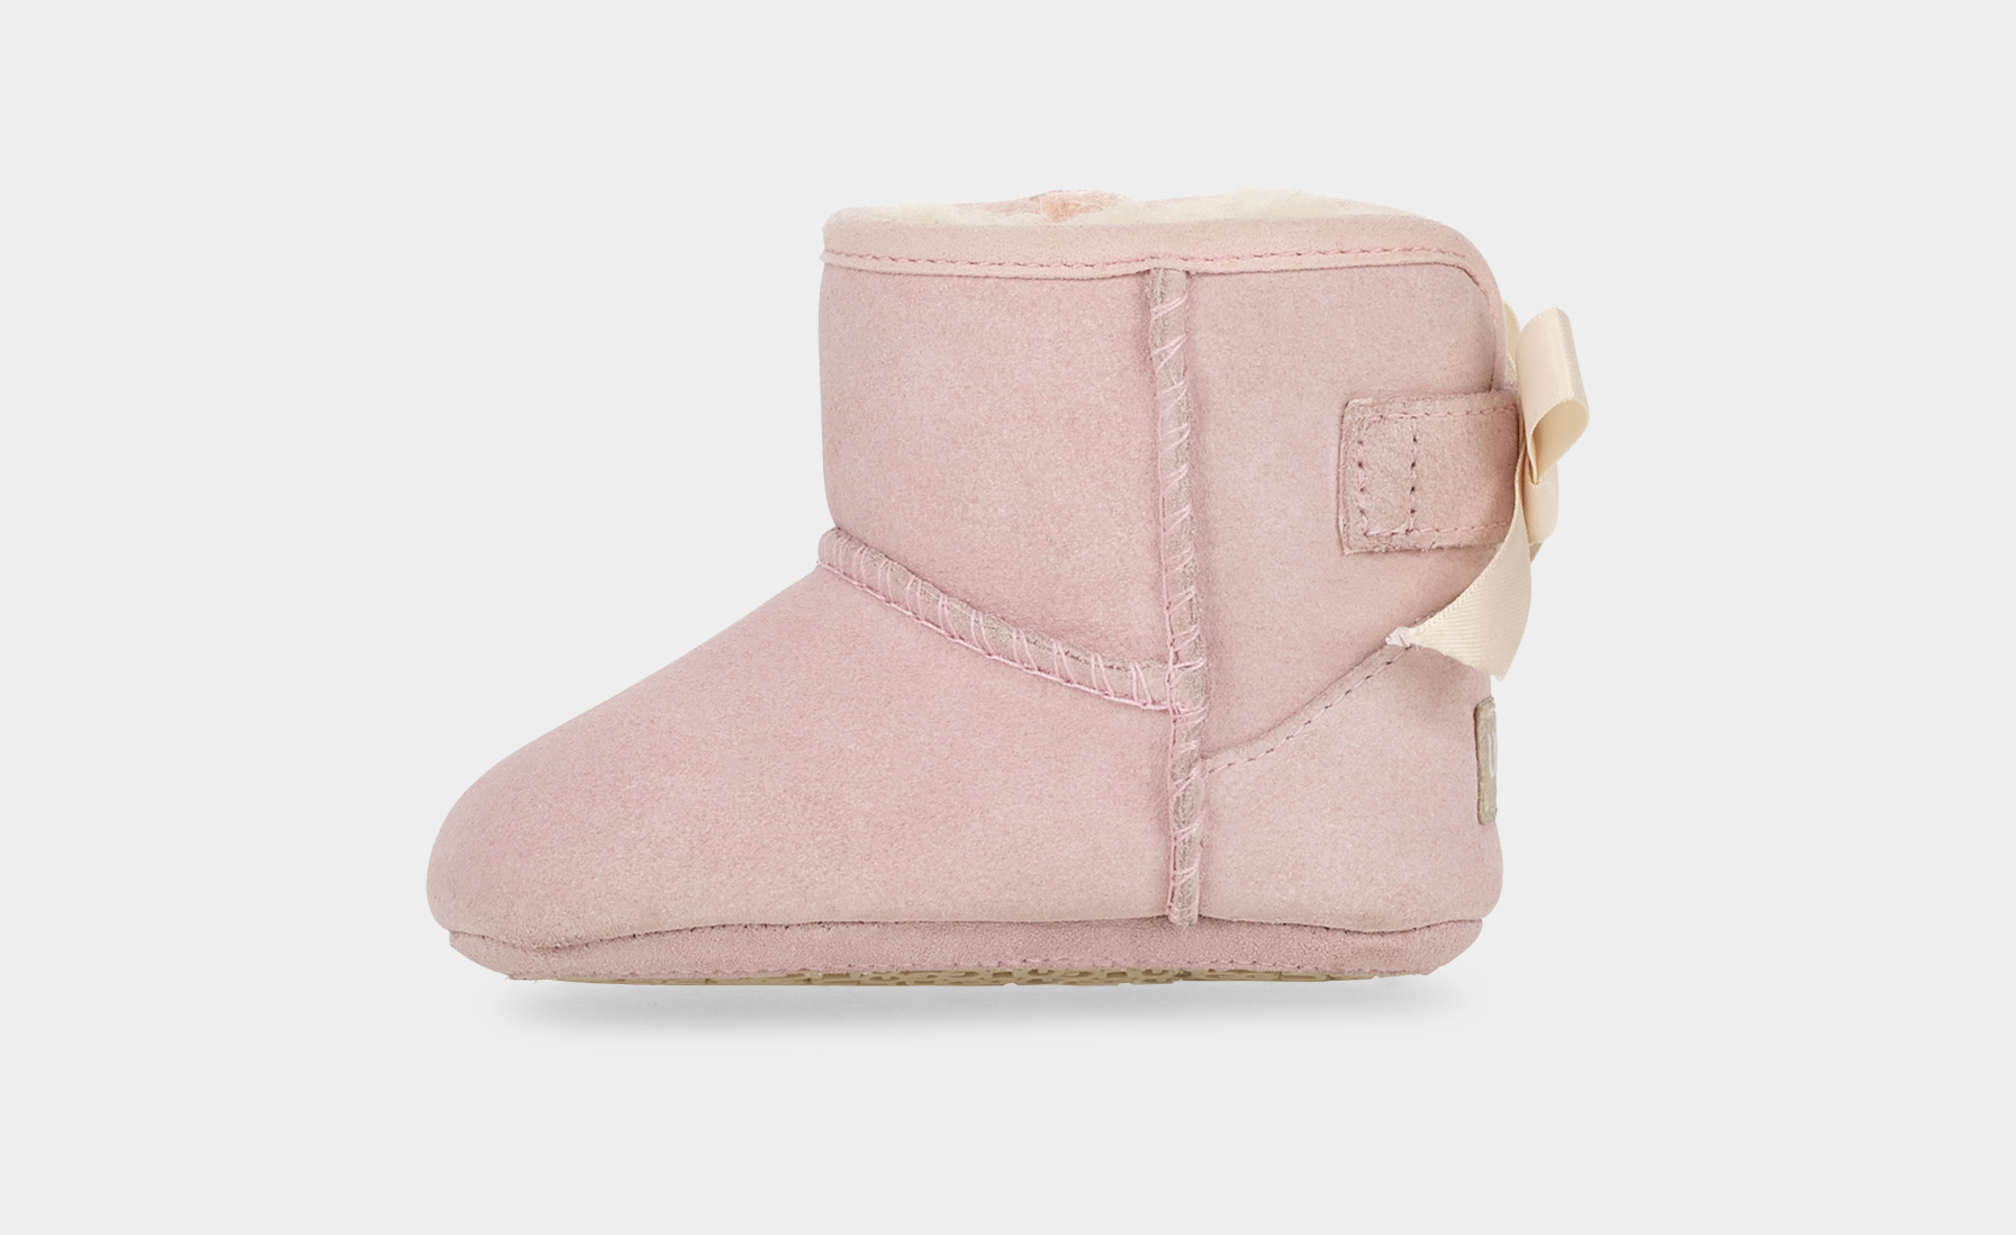 Kids' Jesse Bow II & Beanie Boot | UGG Official®